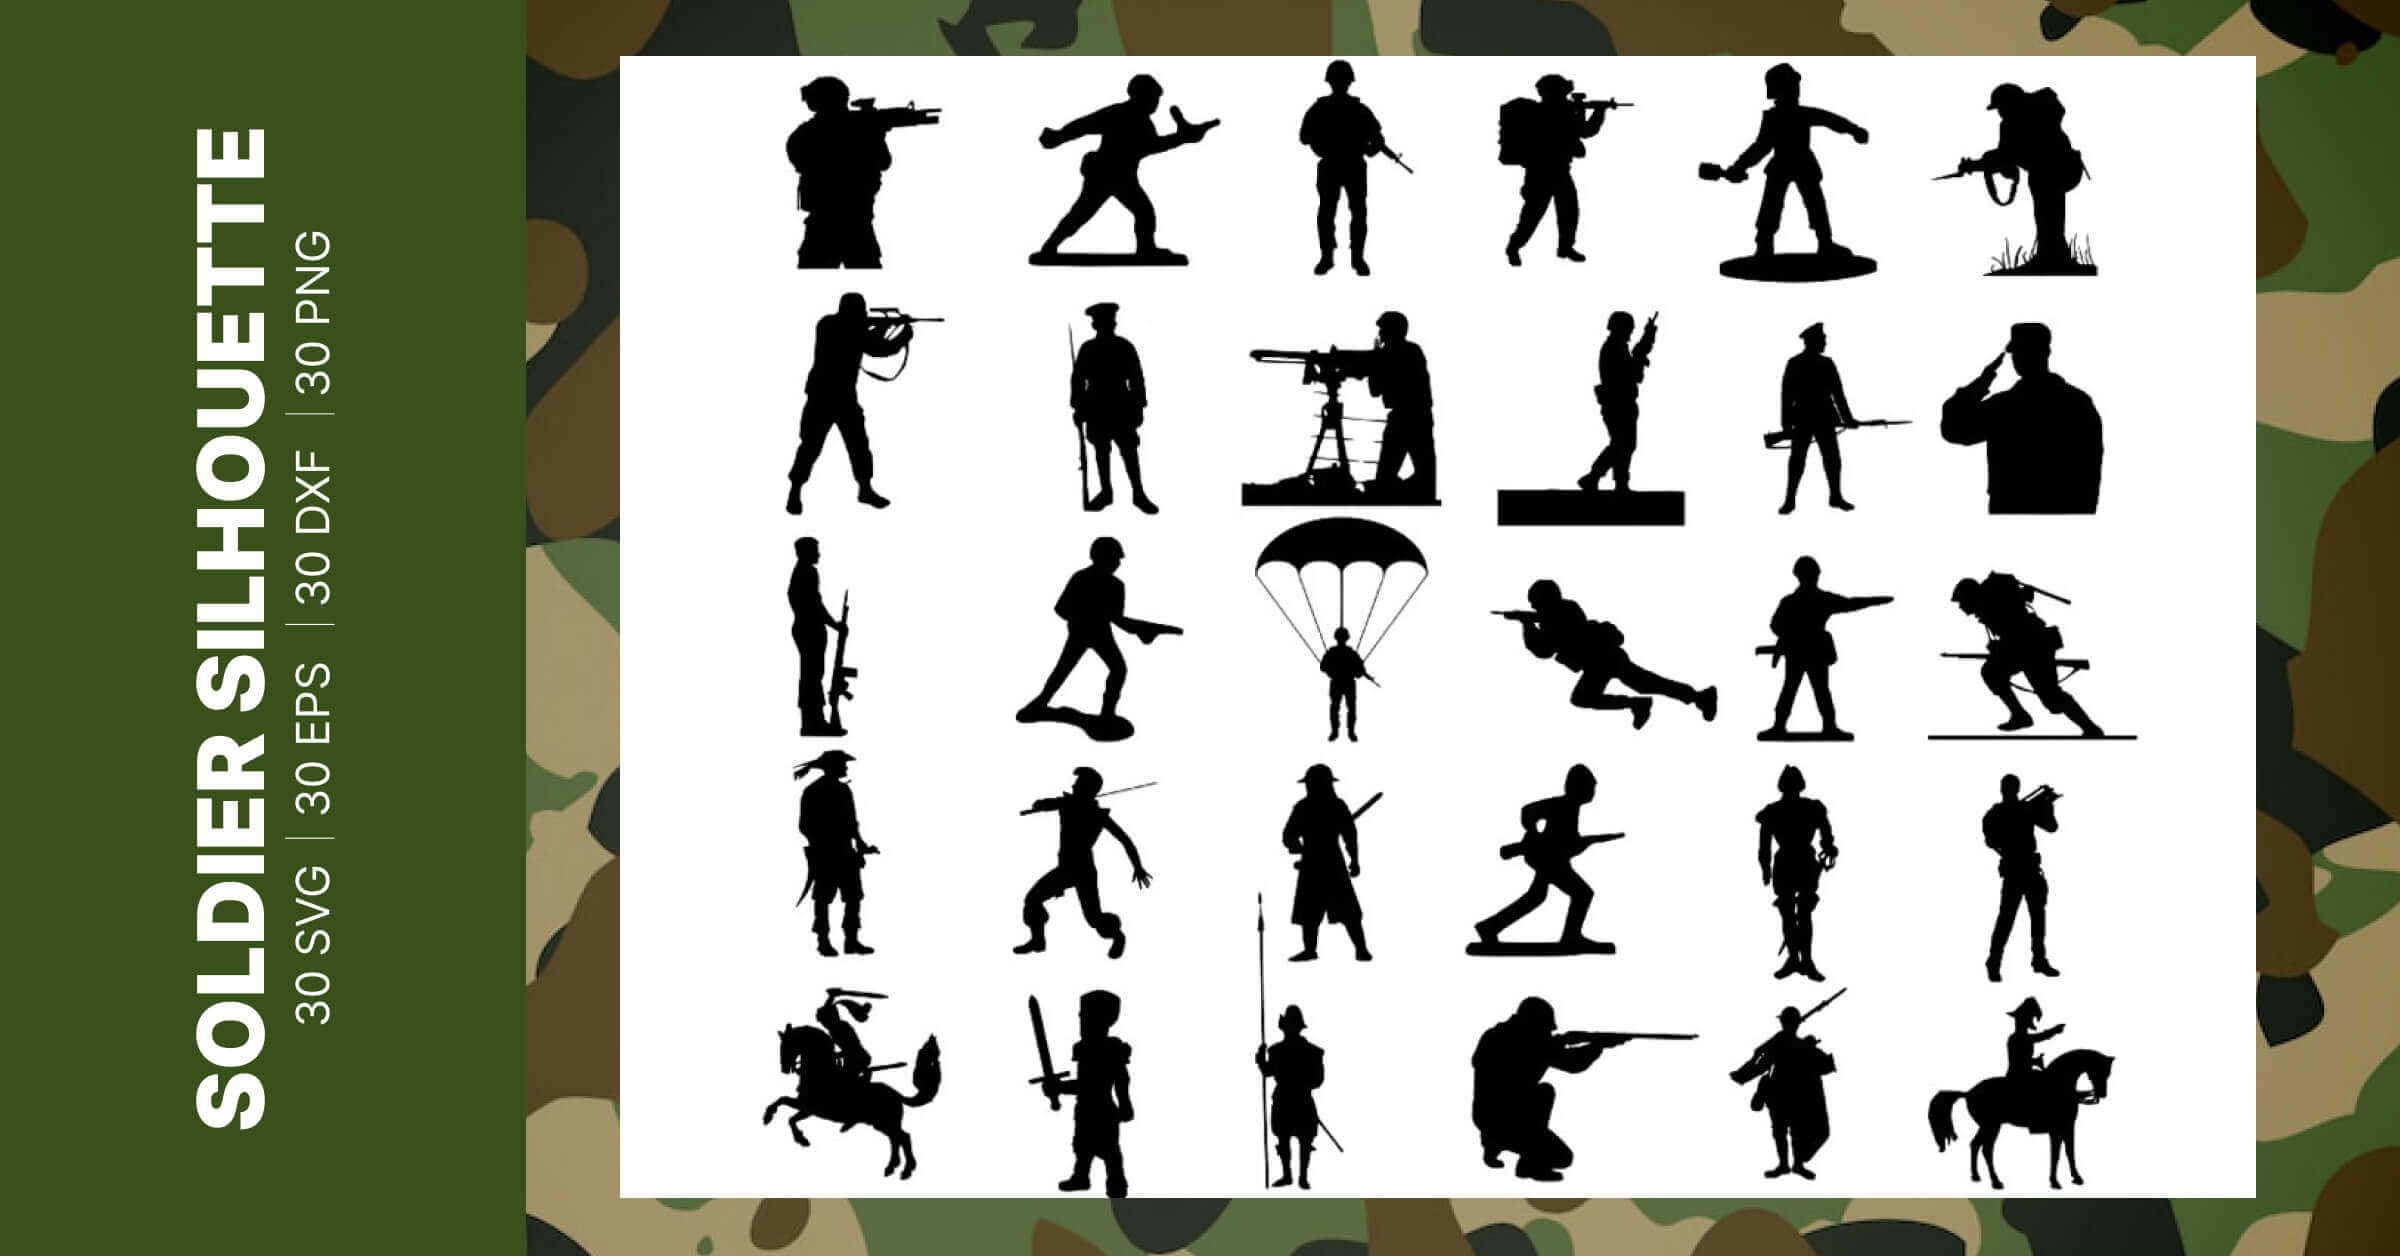 Black silhouettes of soldiers firing, marching and performing other exercises.